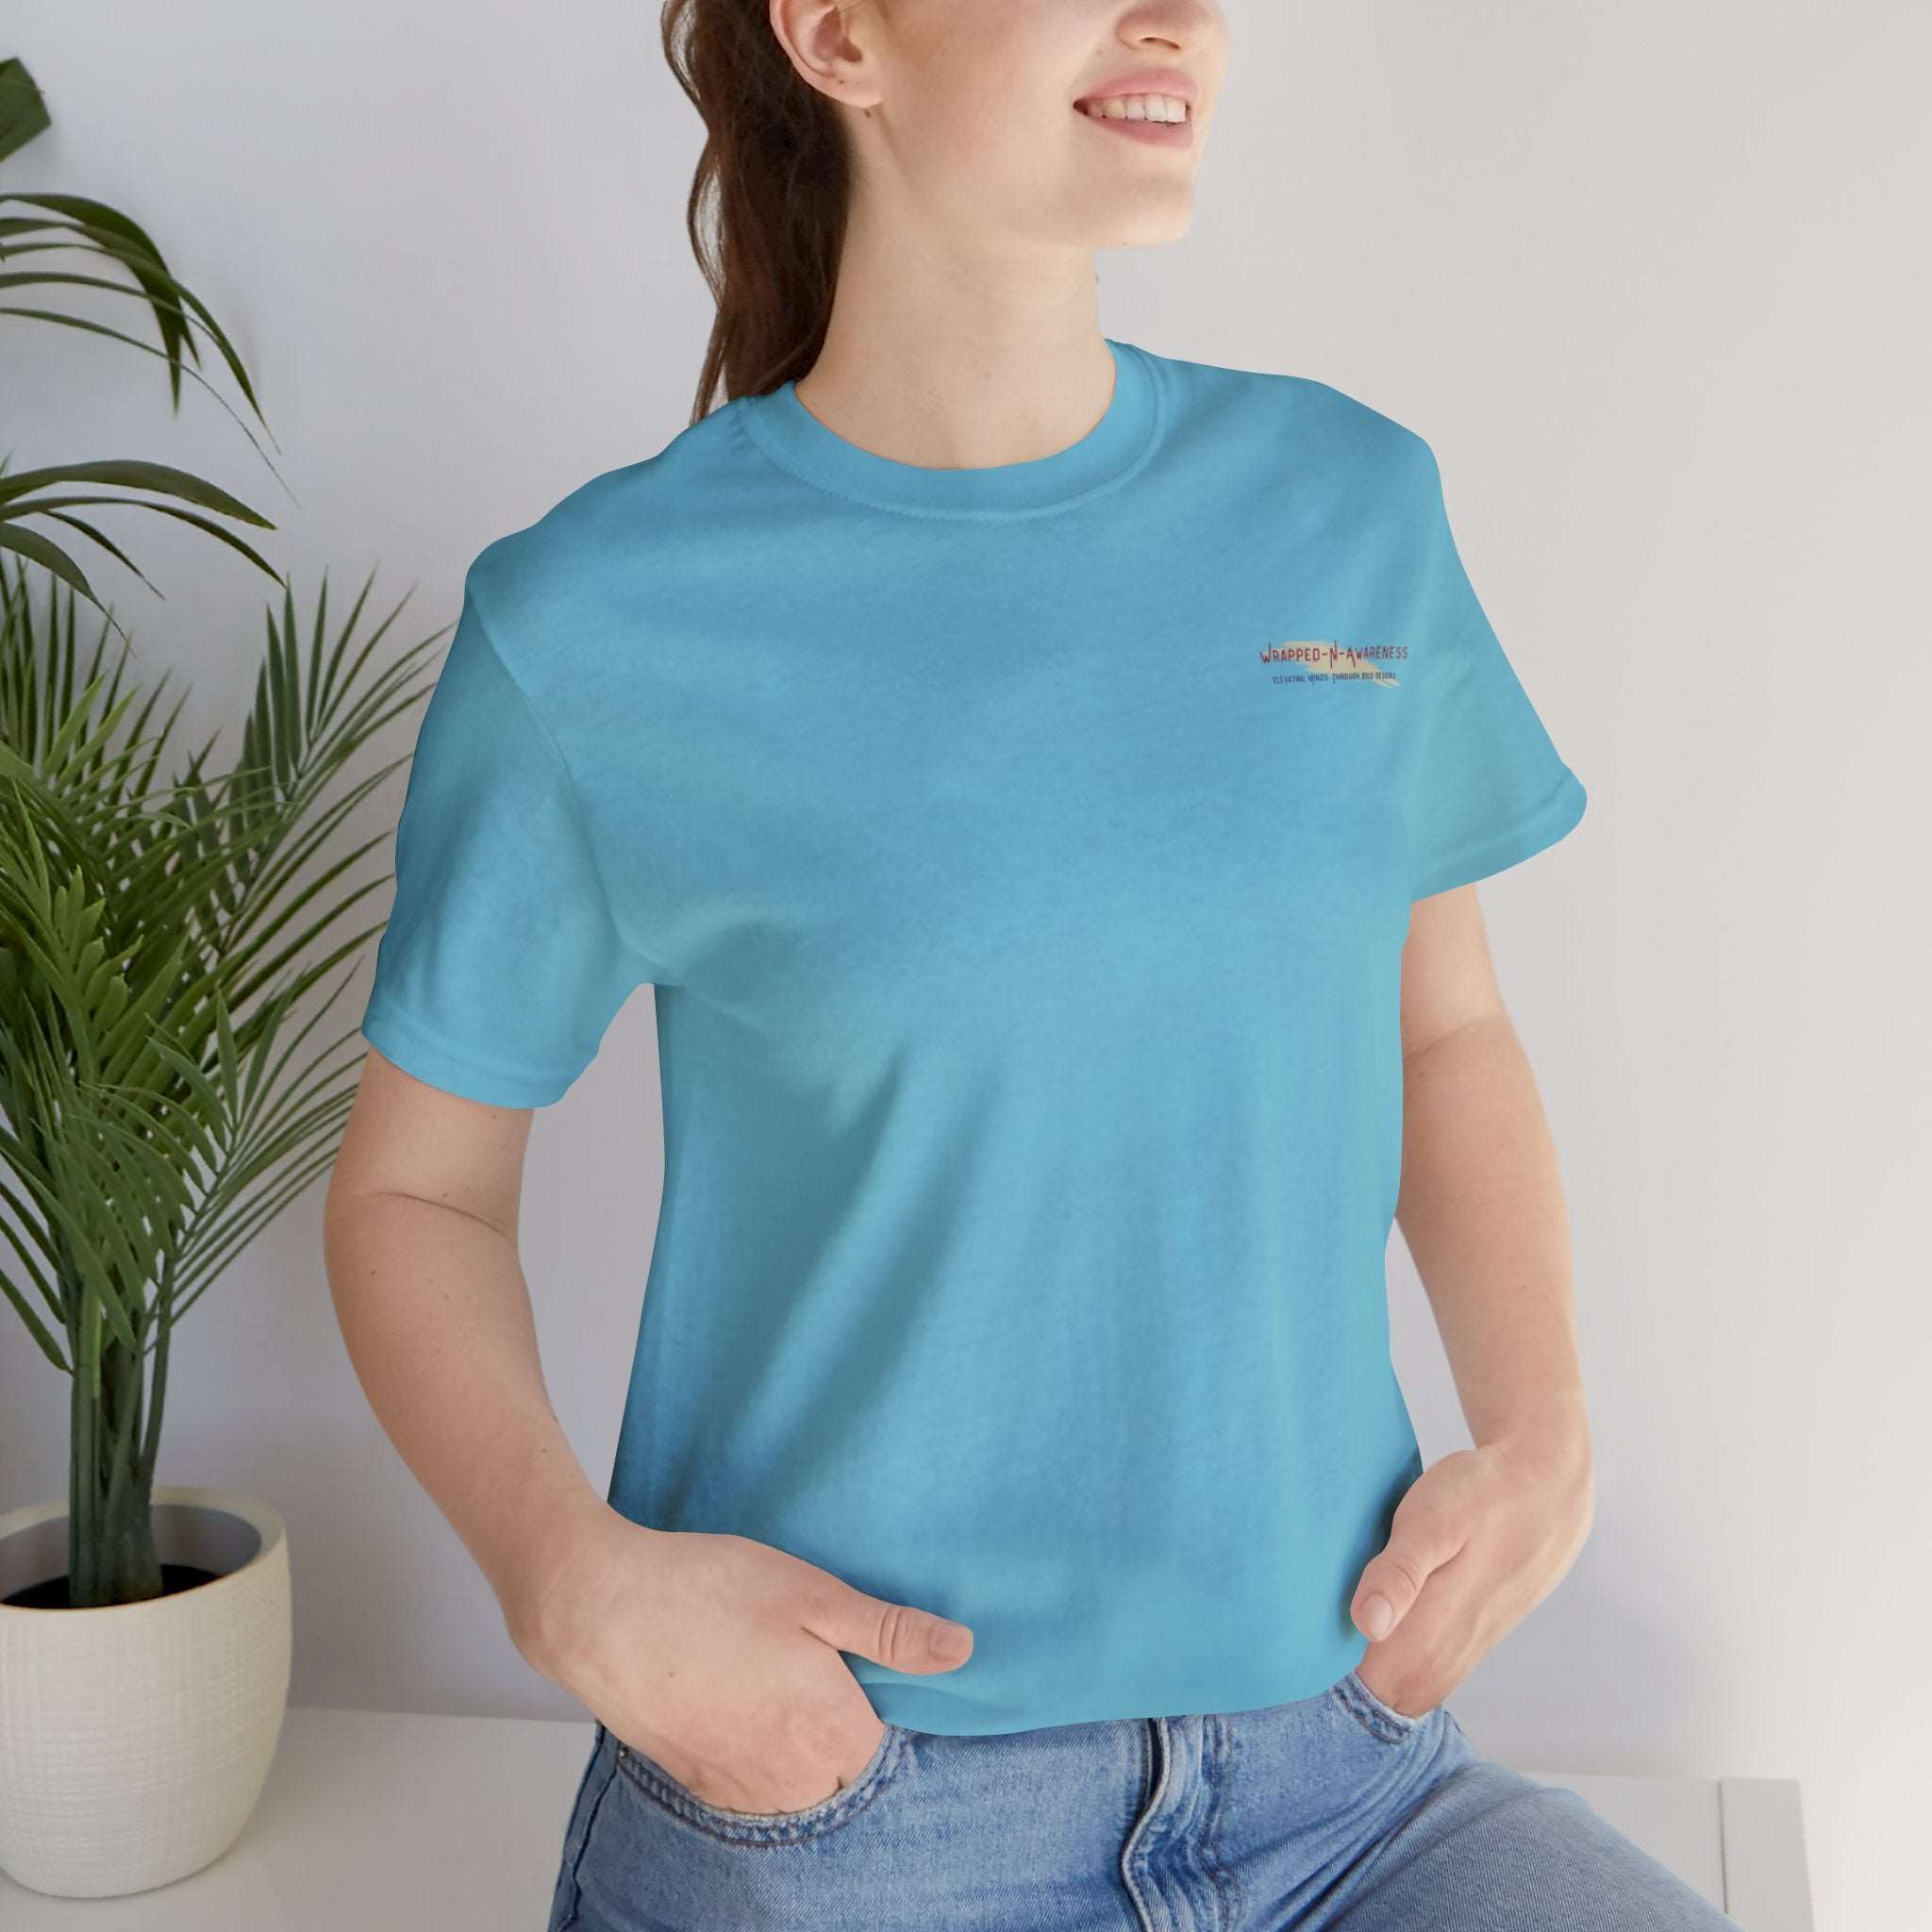 Choose Joy Daily Jersey Tee - Bella+Canvas 3001 Heather Mauve Airlume Cotton Bella+Canvas 3001 Crew Neckline Jersey Short Sleeve Lightweight Fabric Mental Health Support Retail Fit Tear-away Label Tee Unisex Tee T-Shirt 13987073529577286170_2048_fb7d9b8c-80cc-4761-a022-b92f86e814a2 Printify